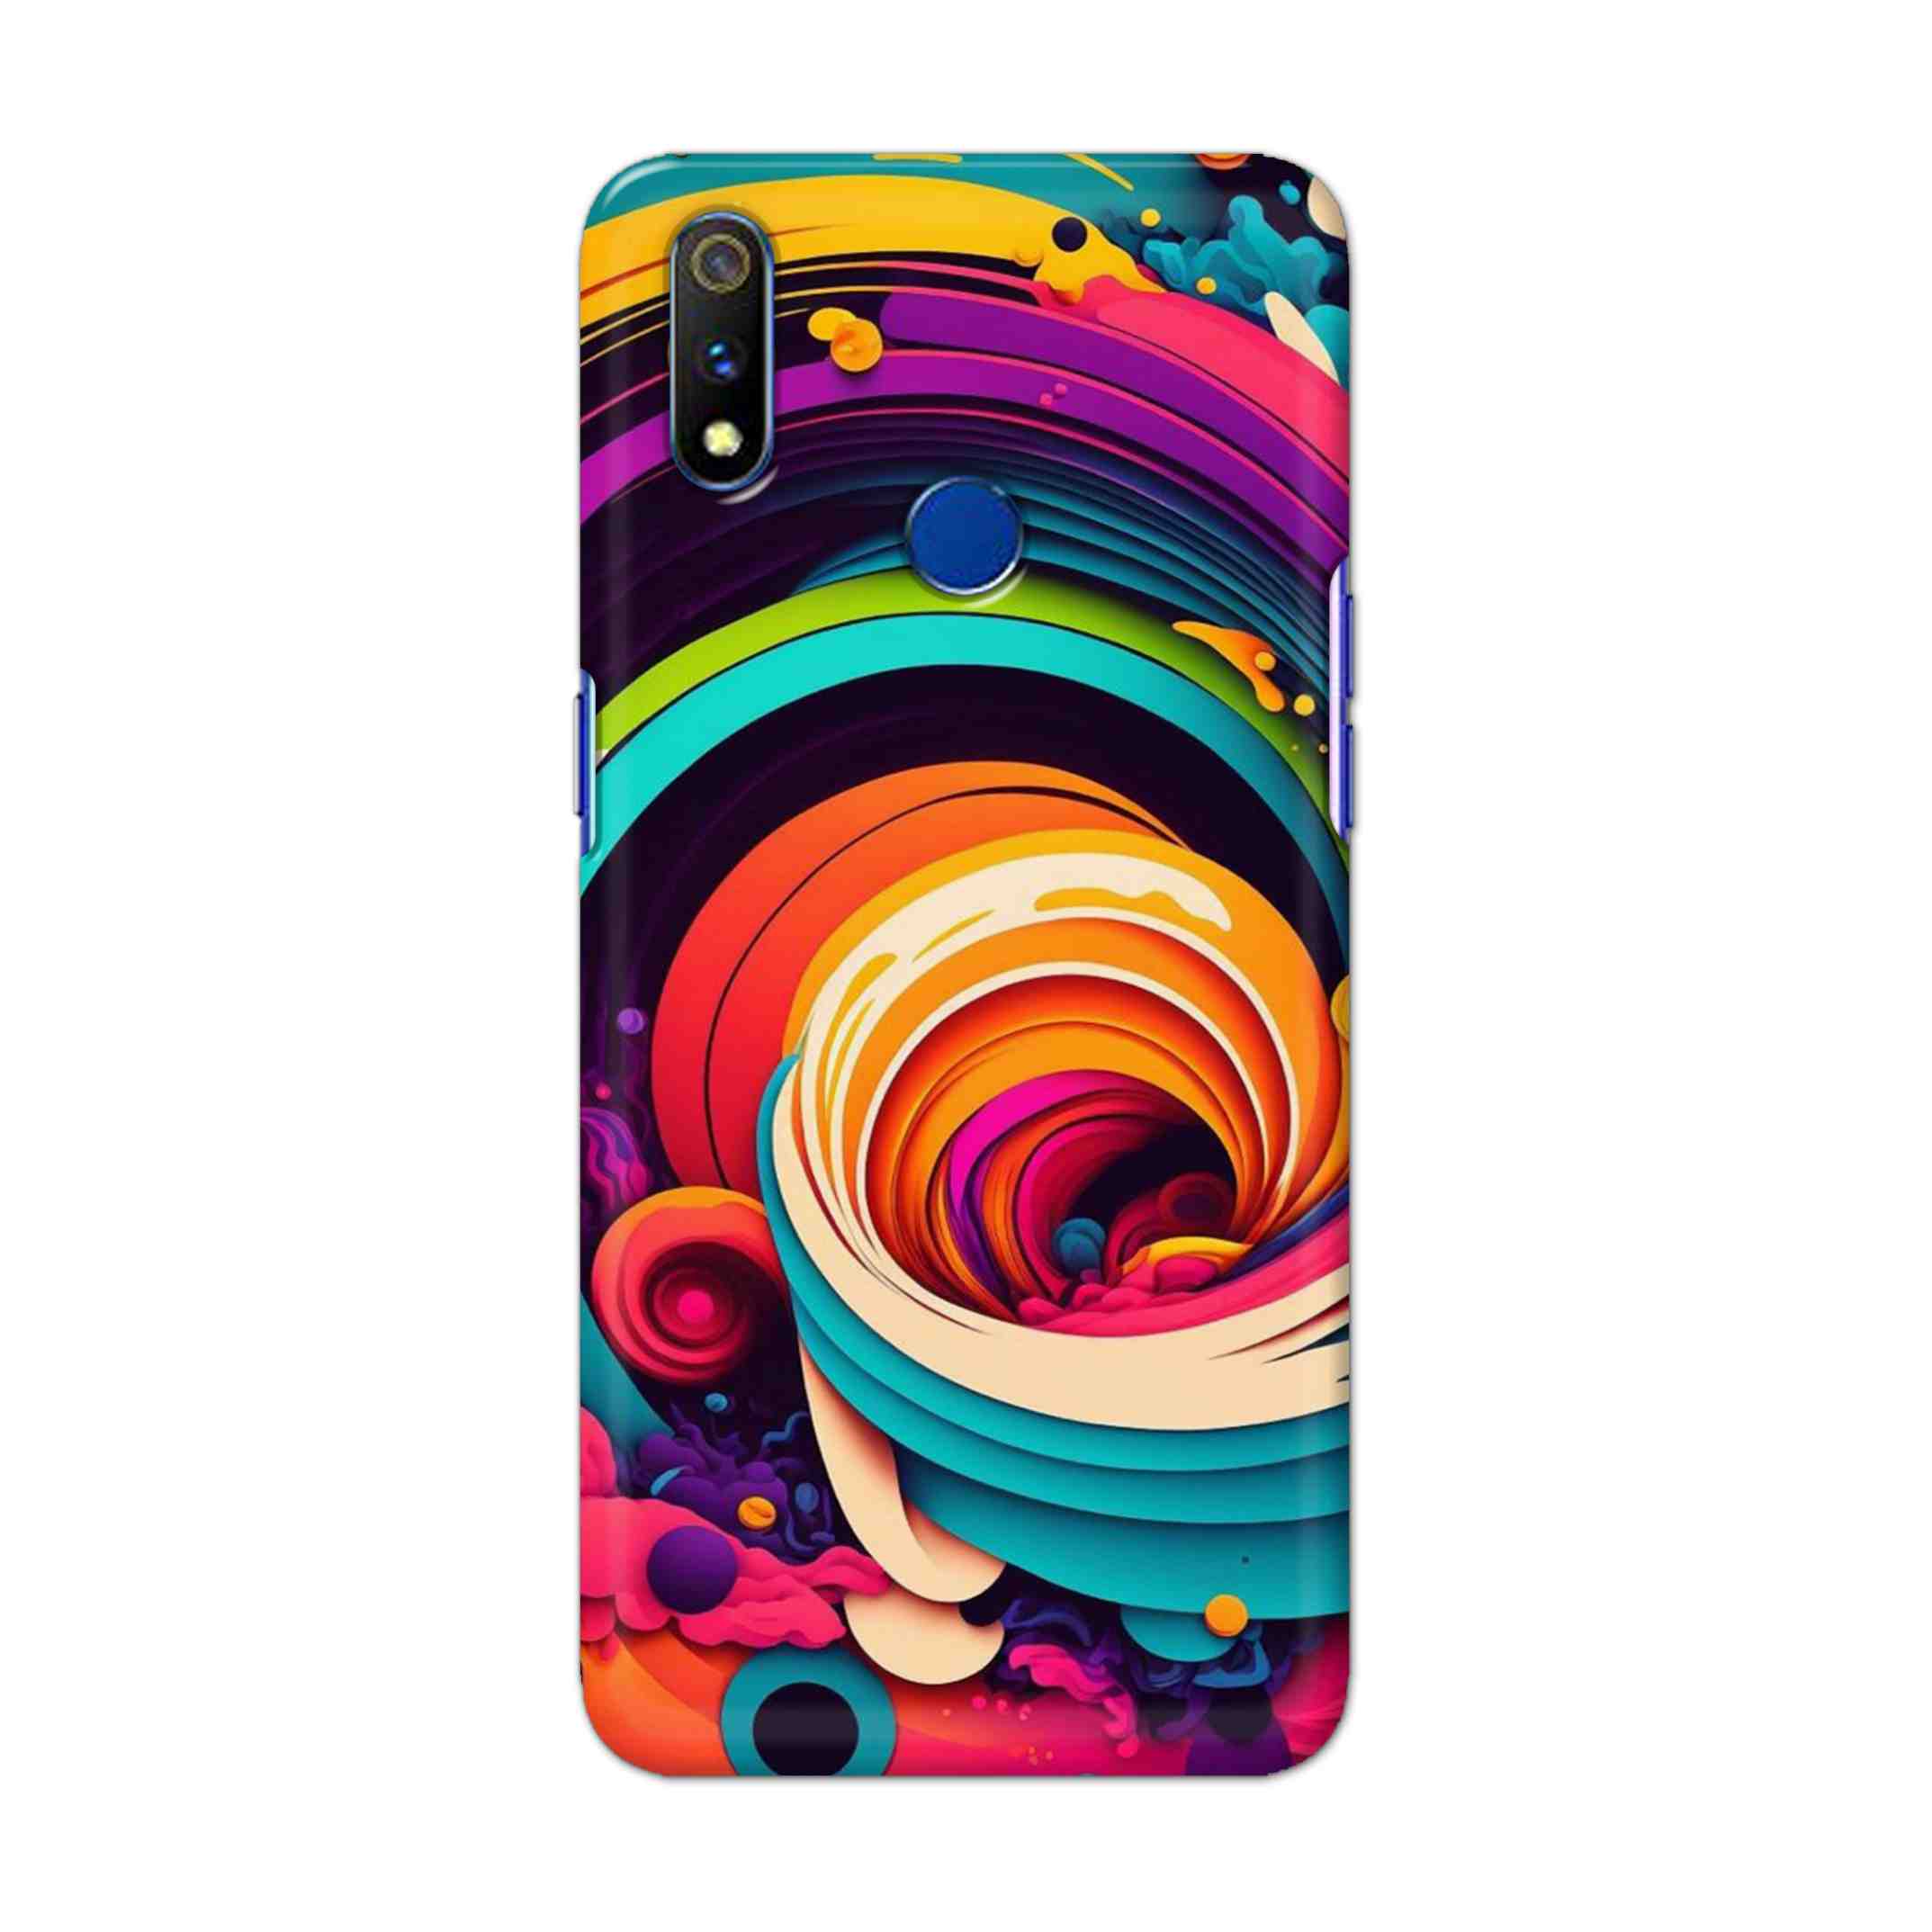 Buy Colour Circle Hard Back Mobile Phone Case Cover For Realme 3 Pro Online